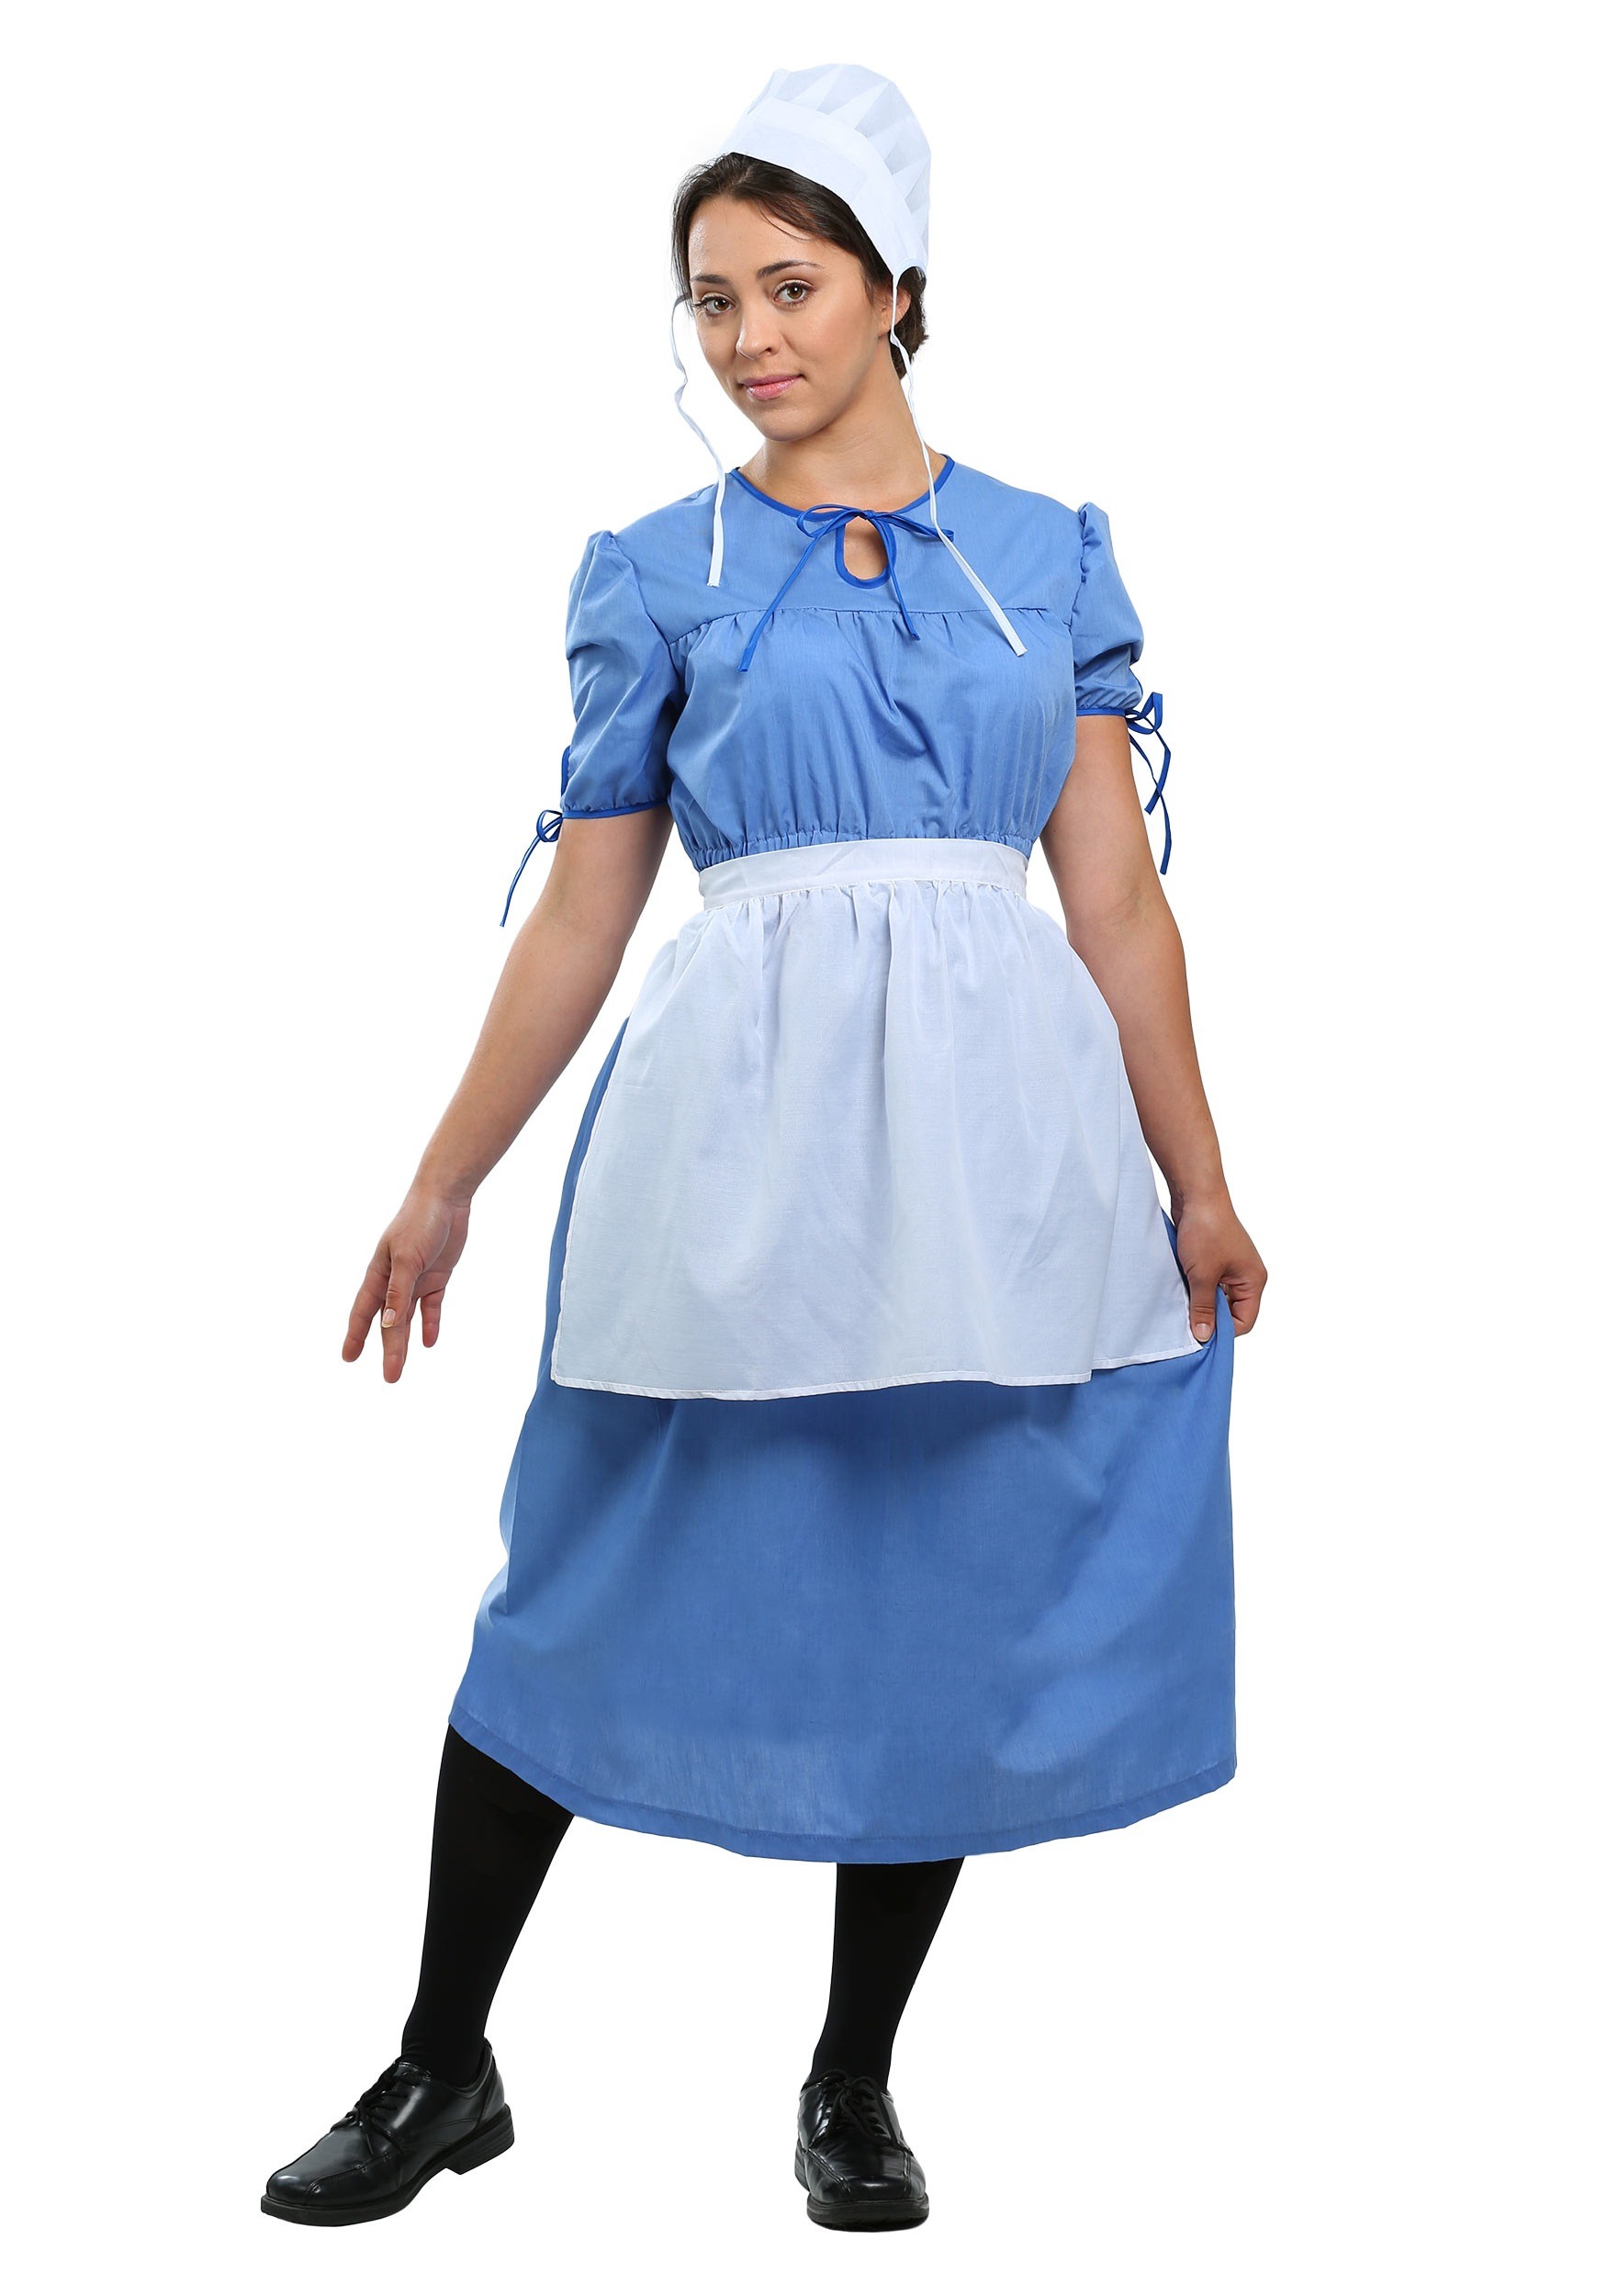 Amish Prairie Woman Fancy Dress Costume For Adults , Colonial Fancy Dress Costumes